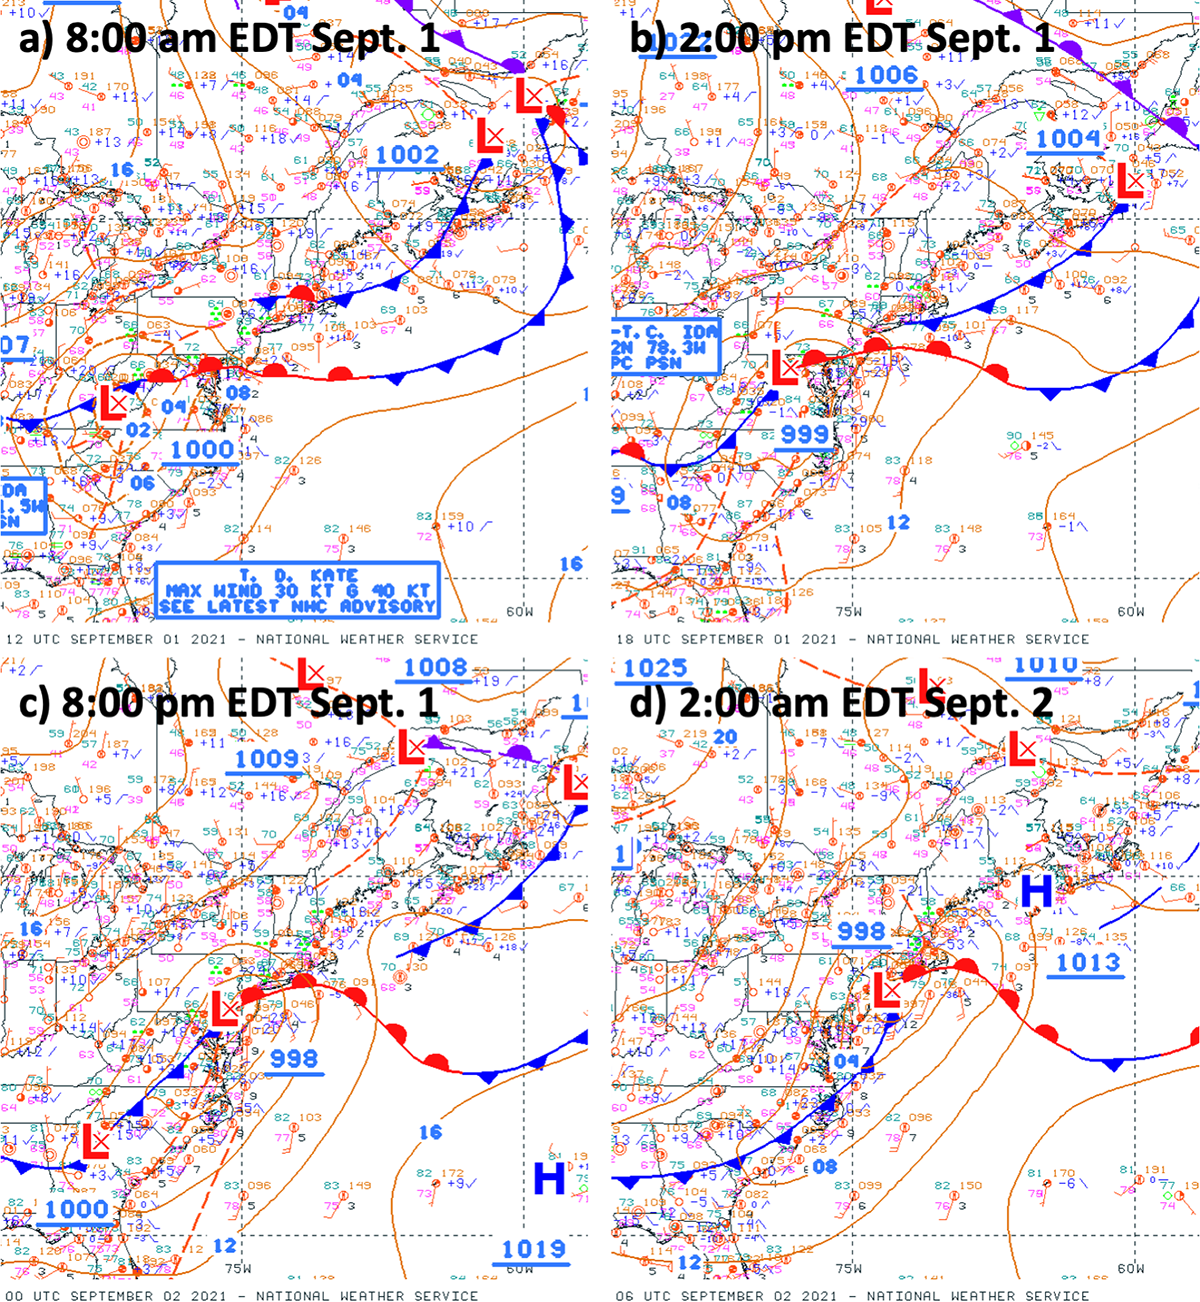 four-panel display of surface analysis maps for the eastern half of the US